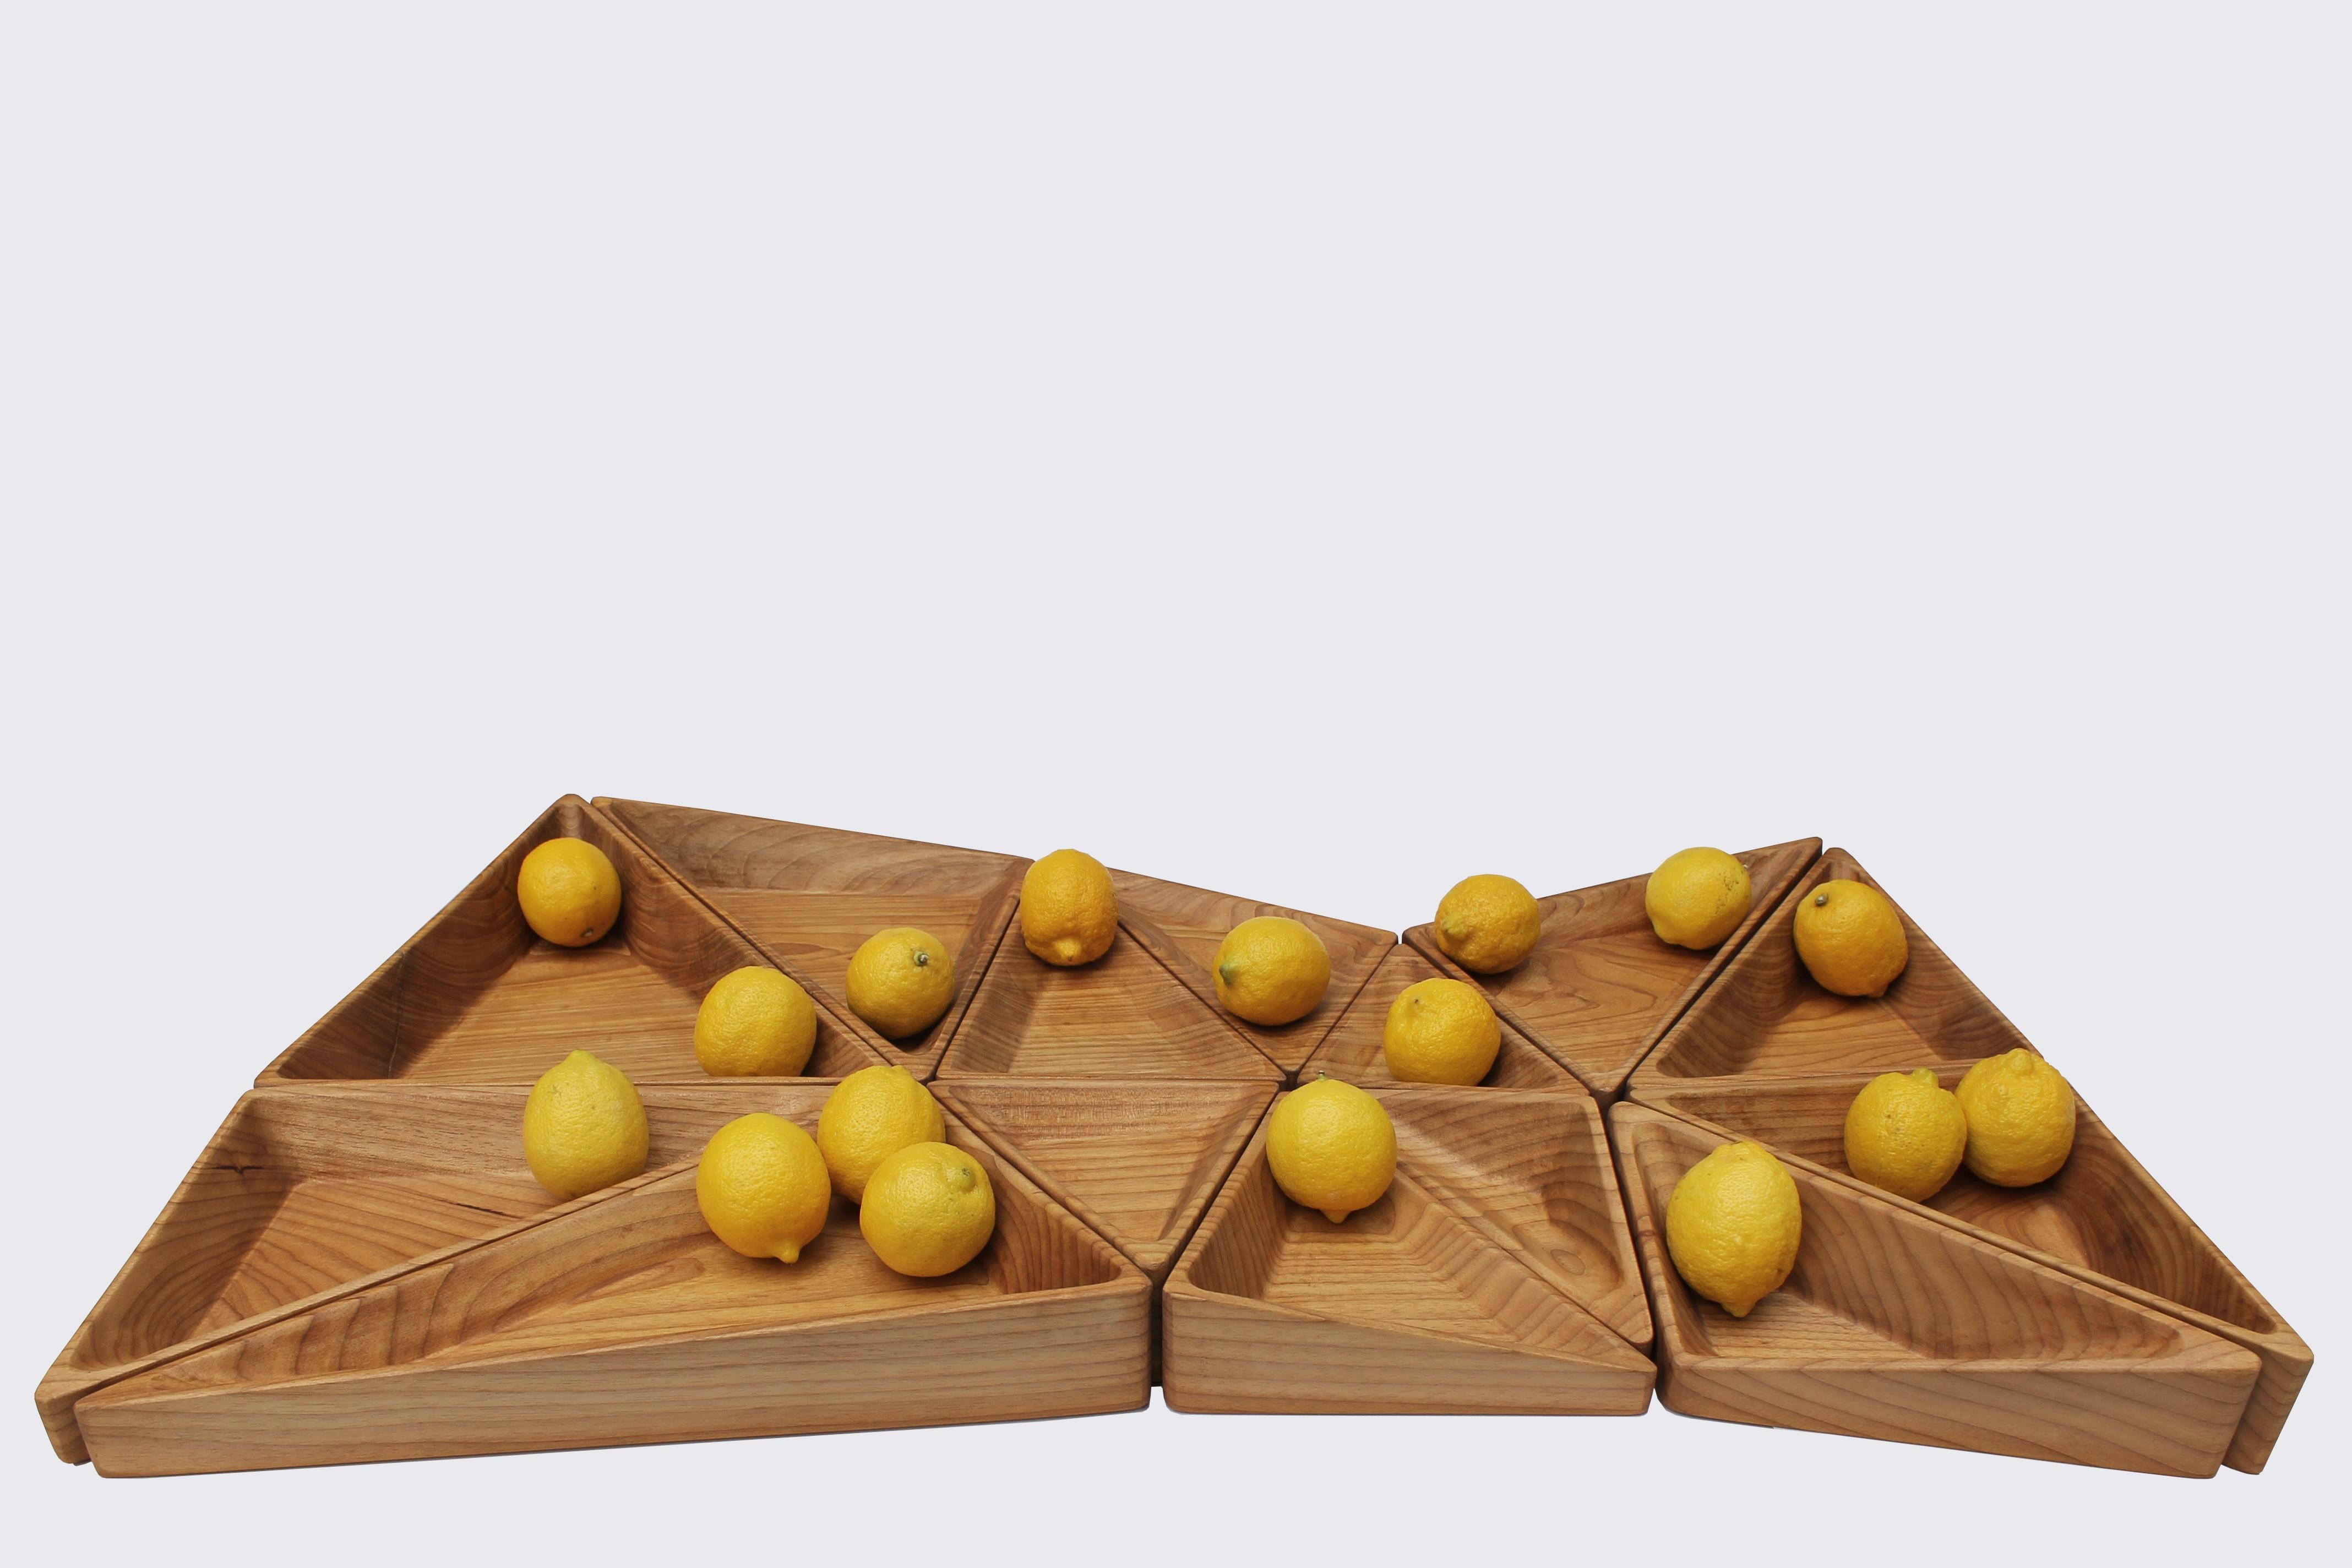 TRI - Wood centerpiece 14 pieces.

The TRI centerpiece was developed from the distortion of a grid of triangles on the 3 axes, which provides a complex geometry of reentrances and saliences for storage. There are 14 pieces that can be purchased